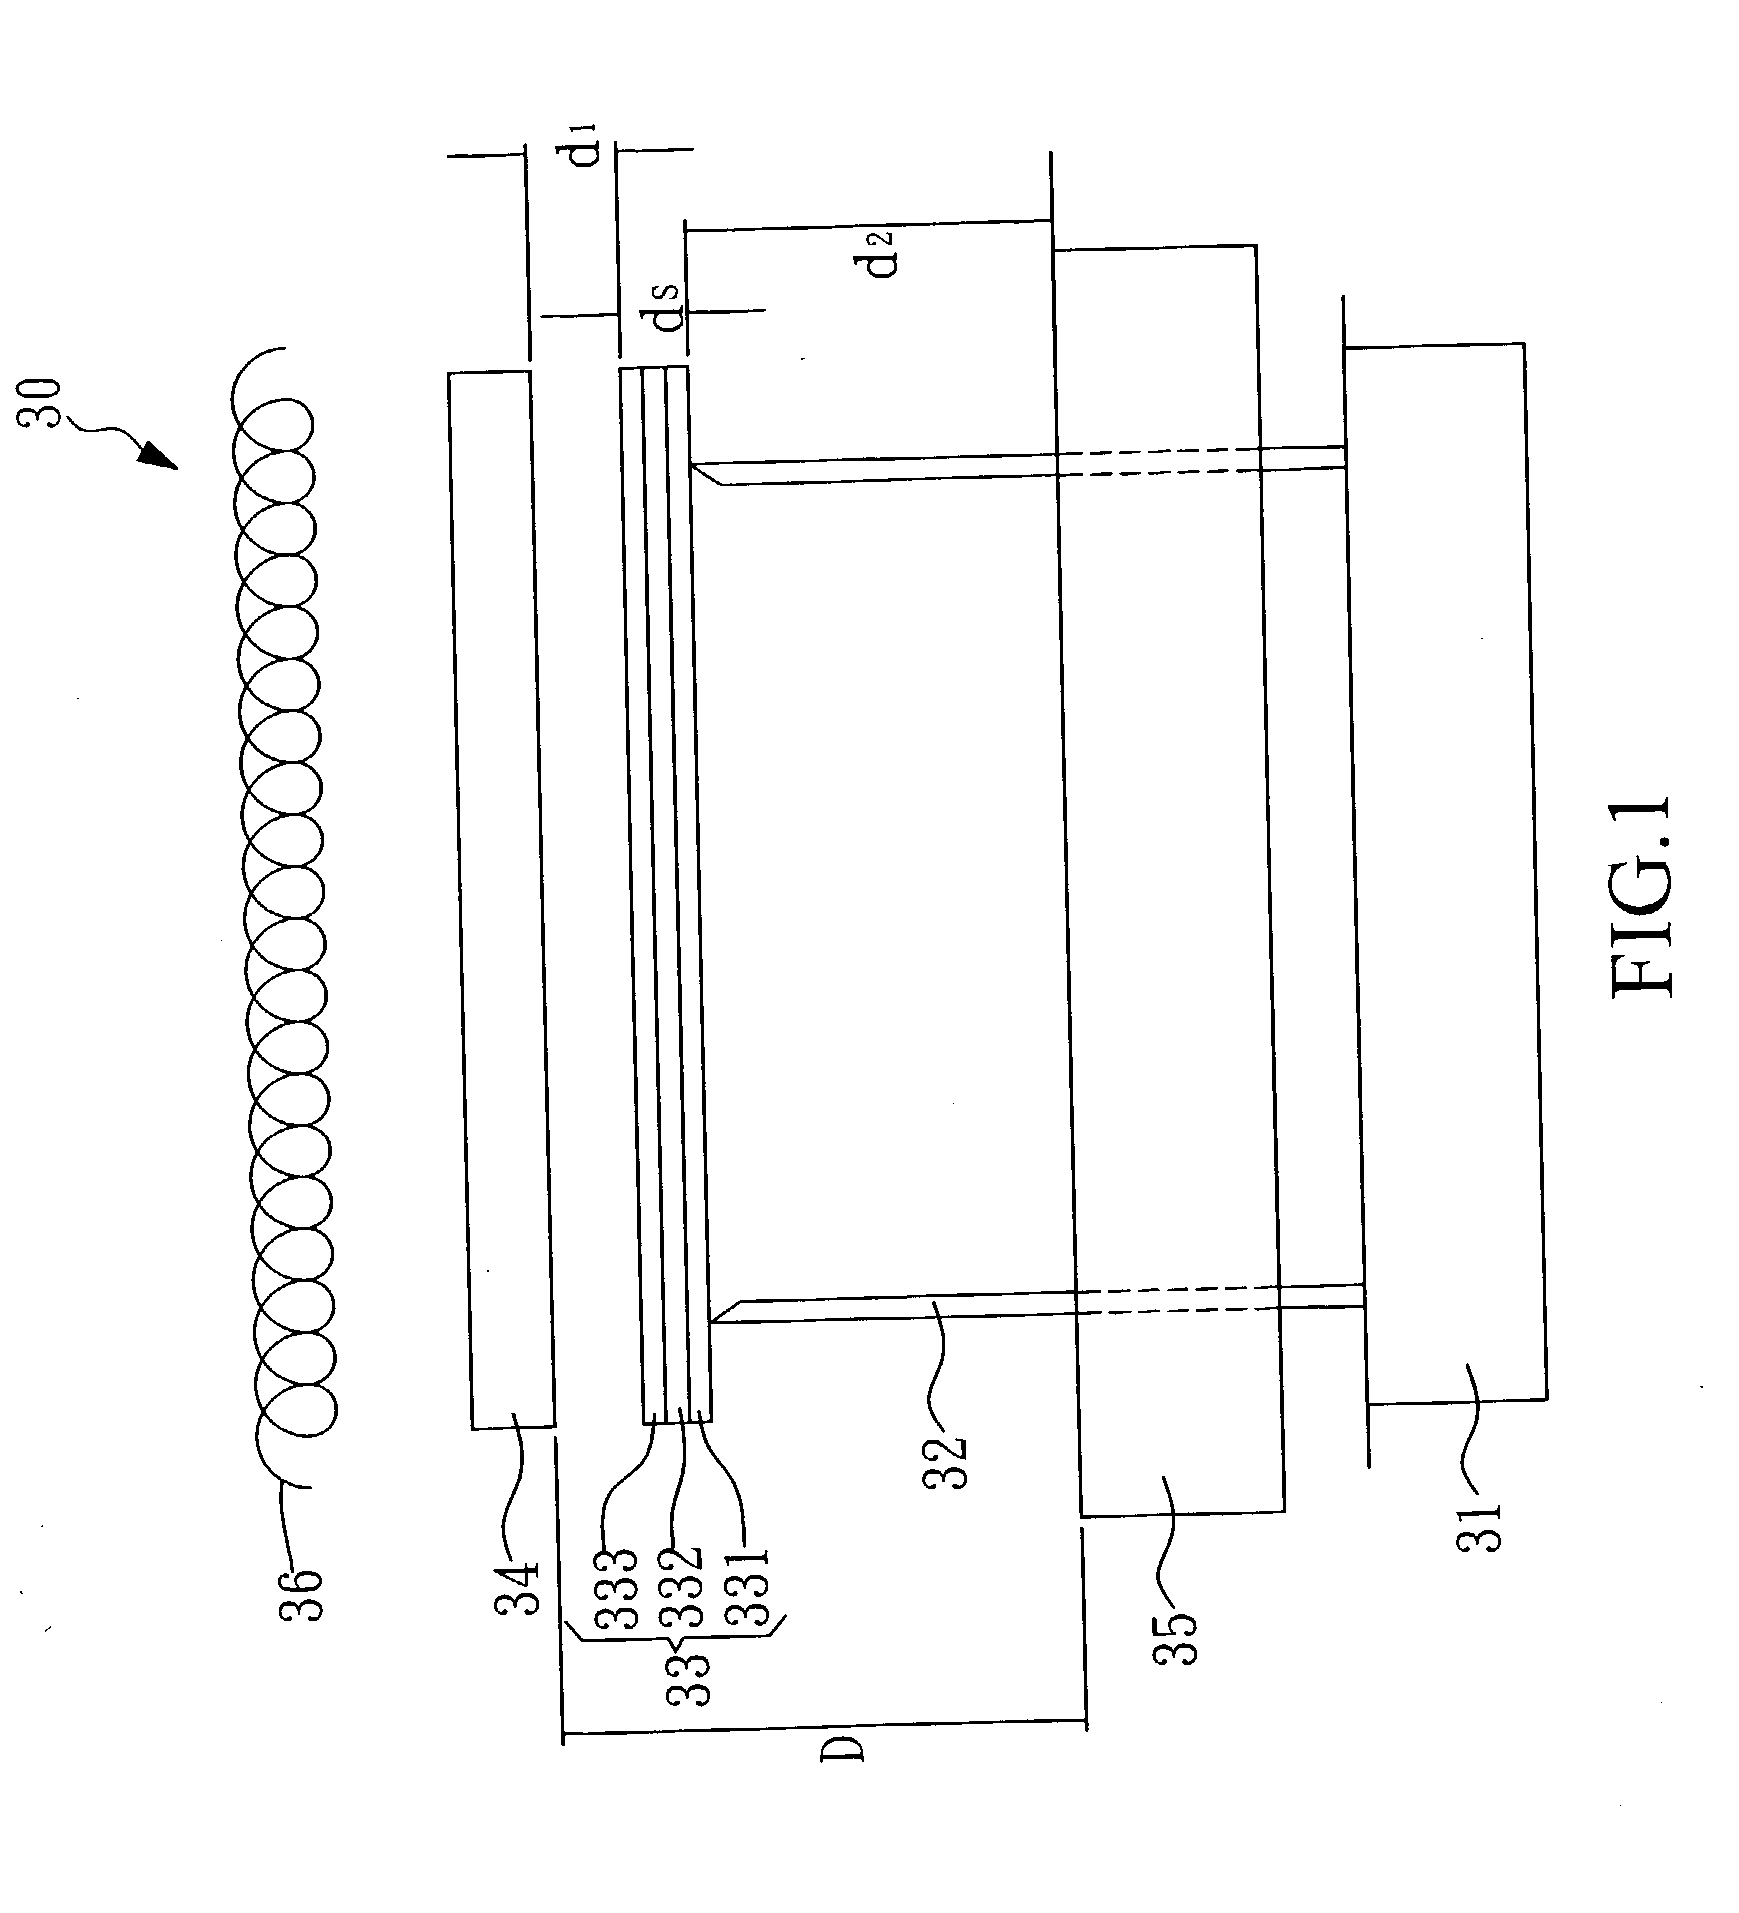 Rapid energy transfer annealing device and process